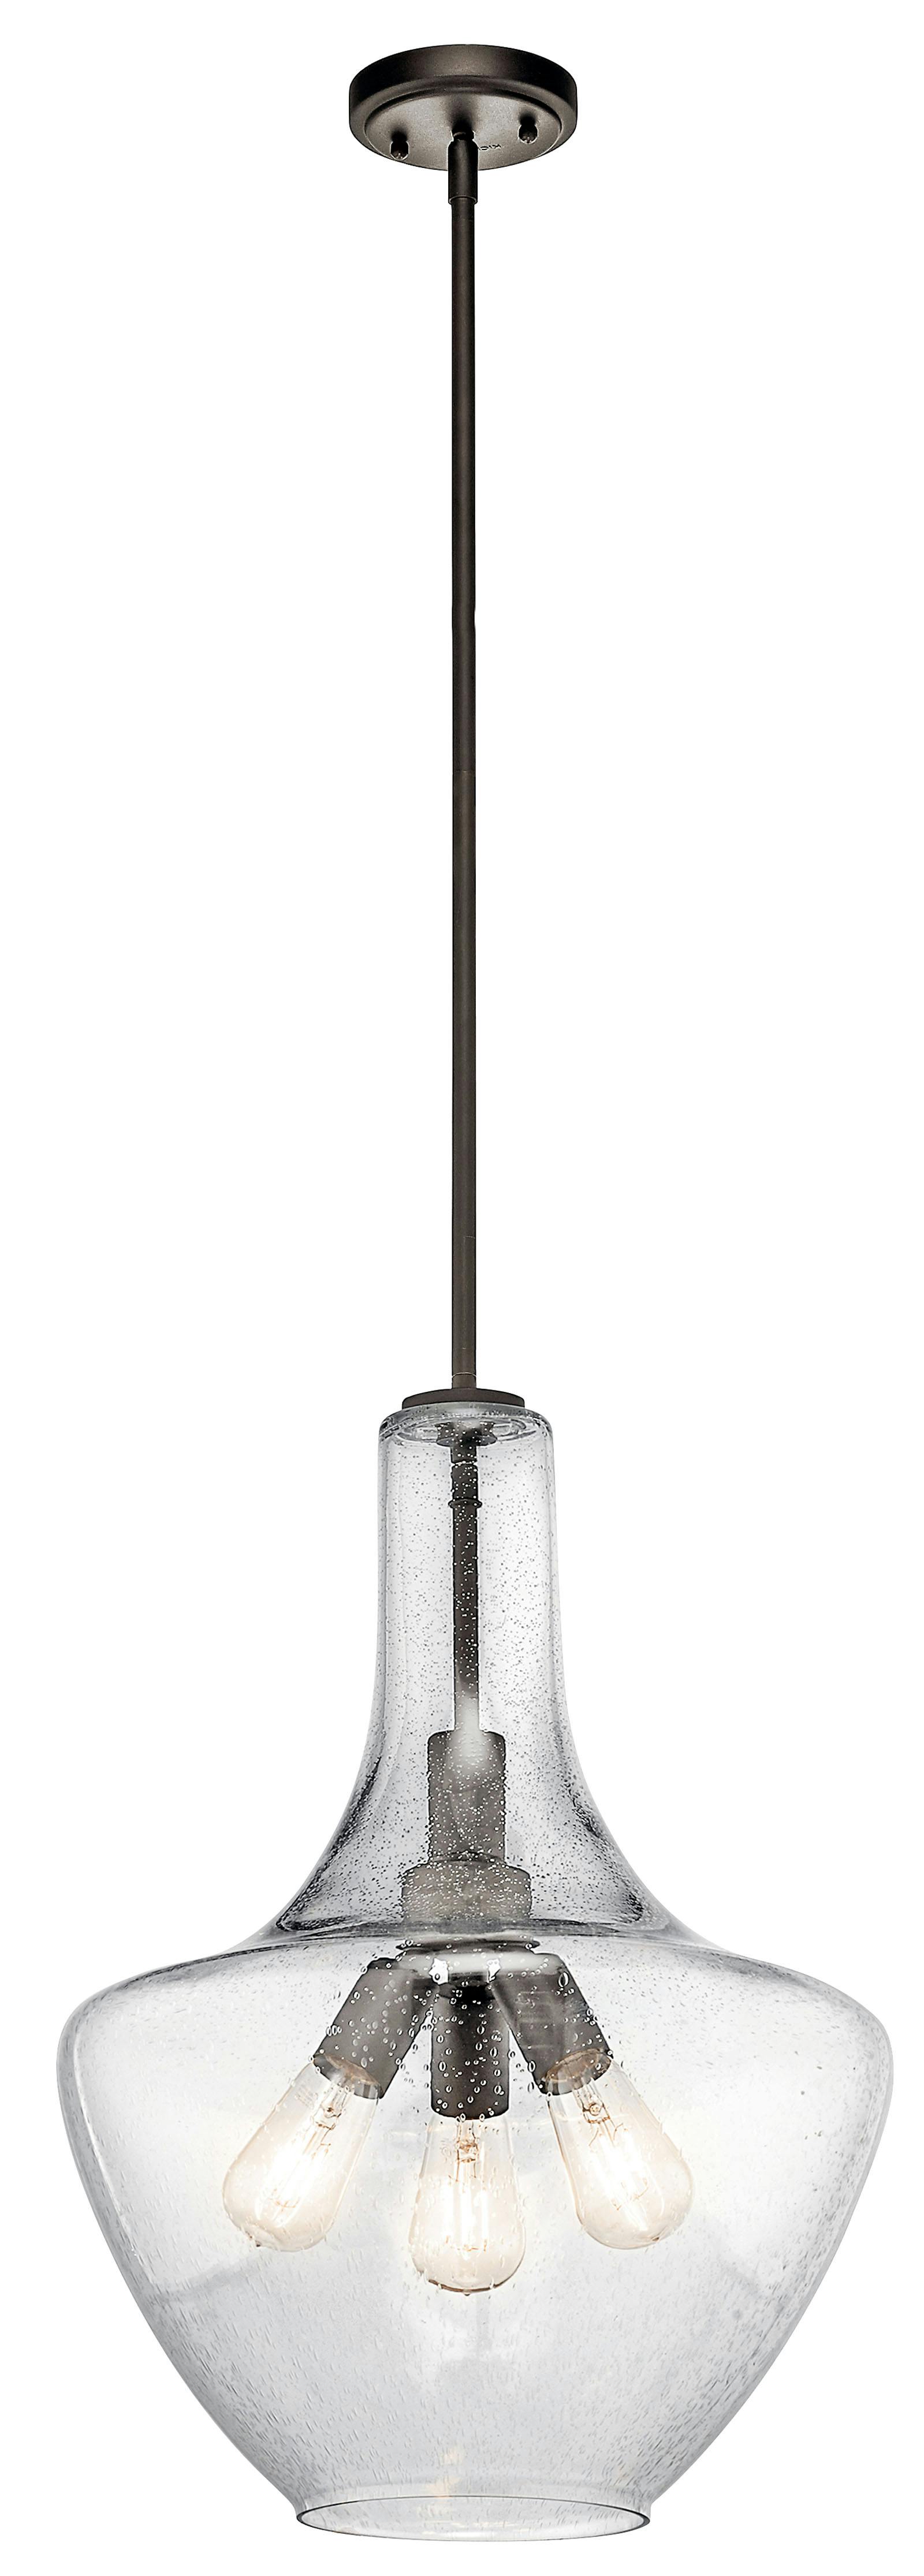 Everly 22.75" 3 Light Pendant Olde Bronze on a white background